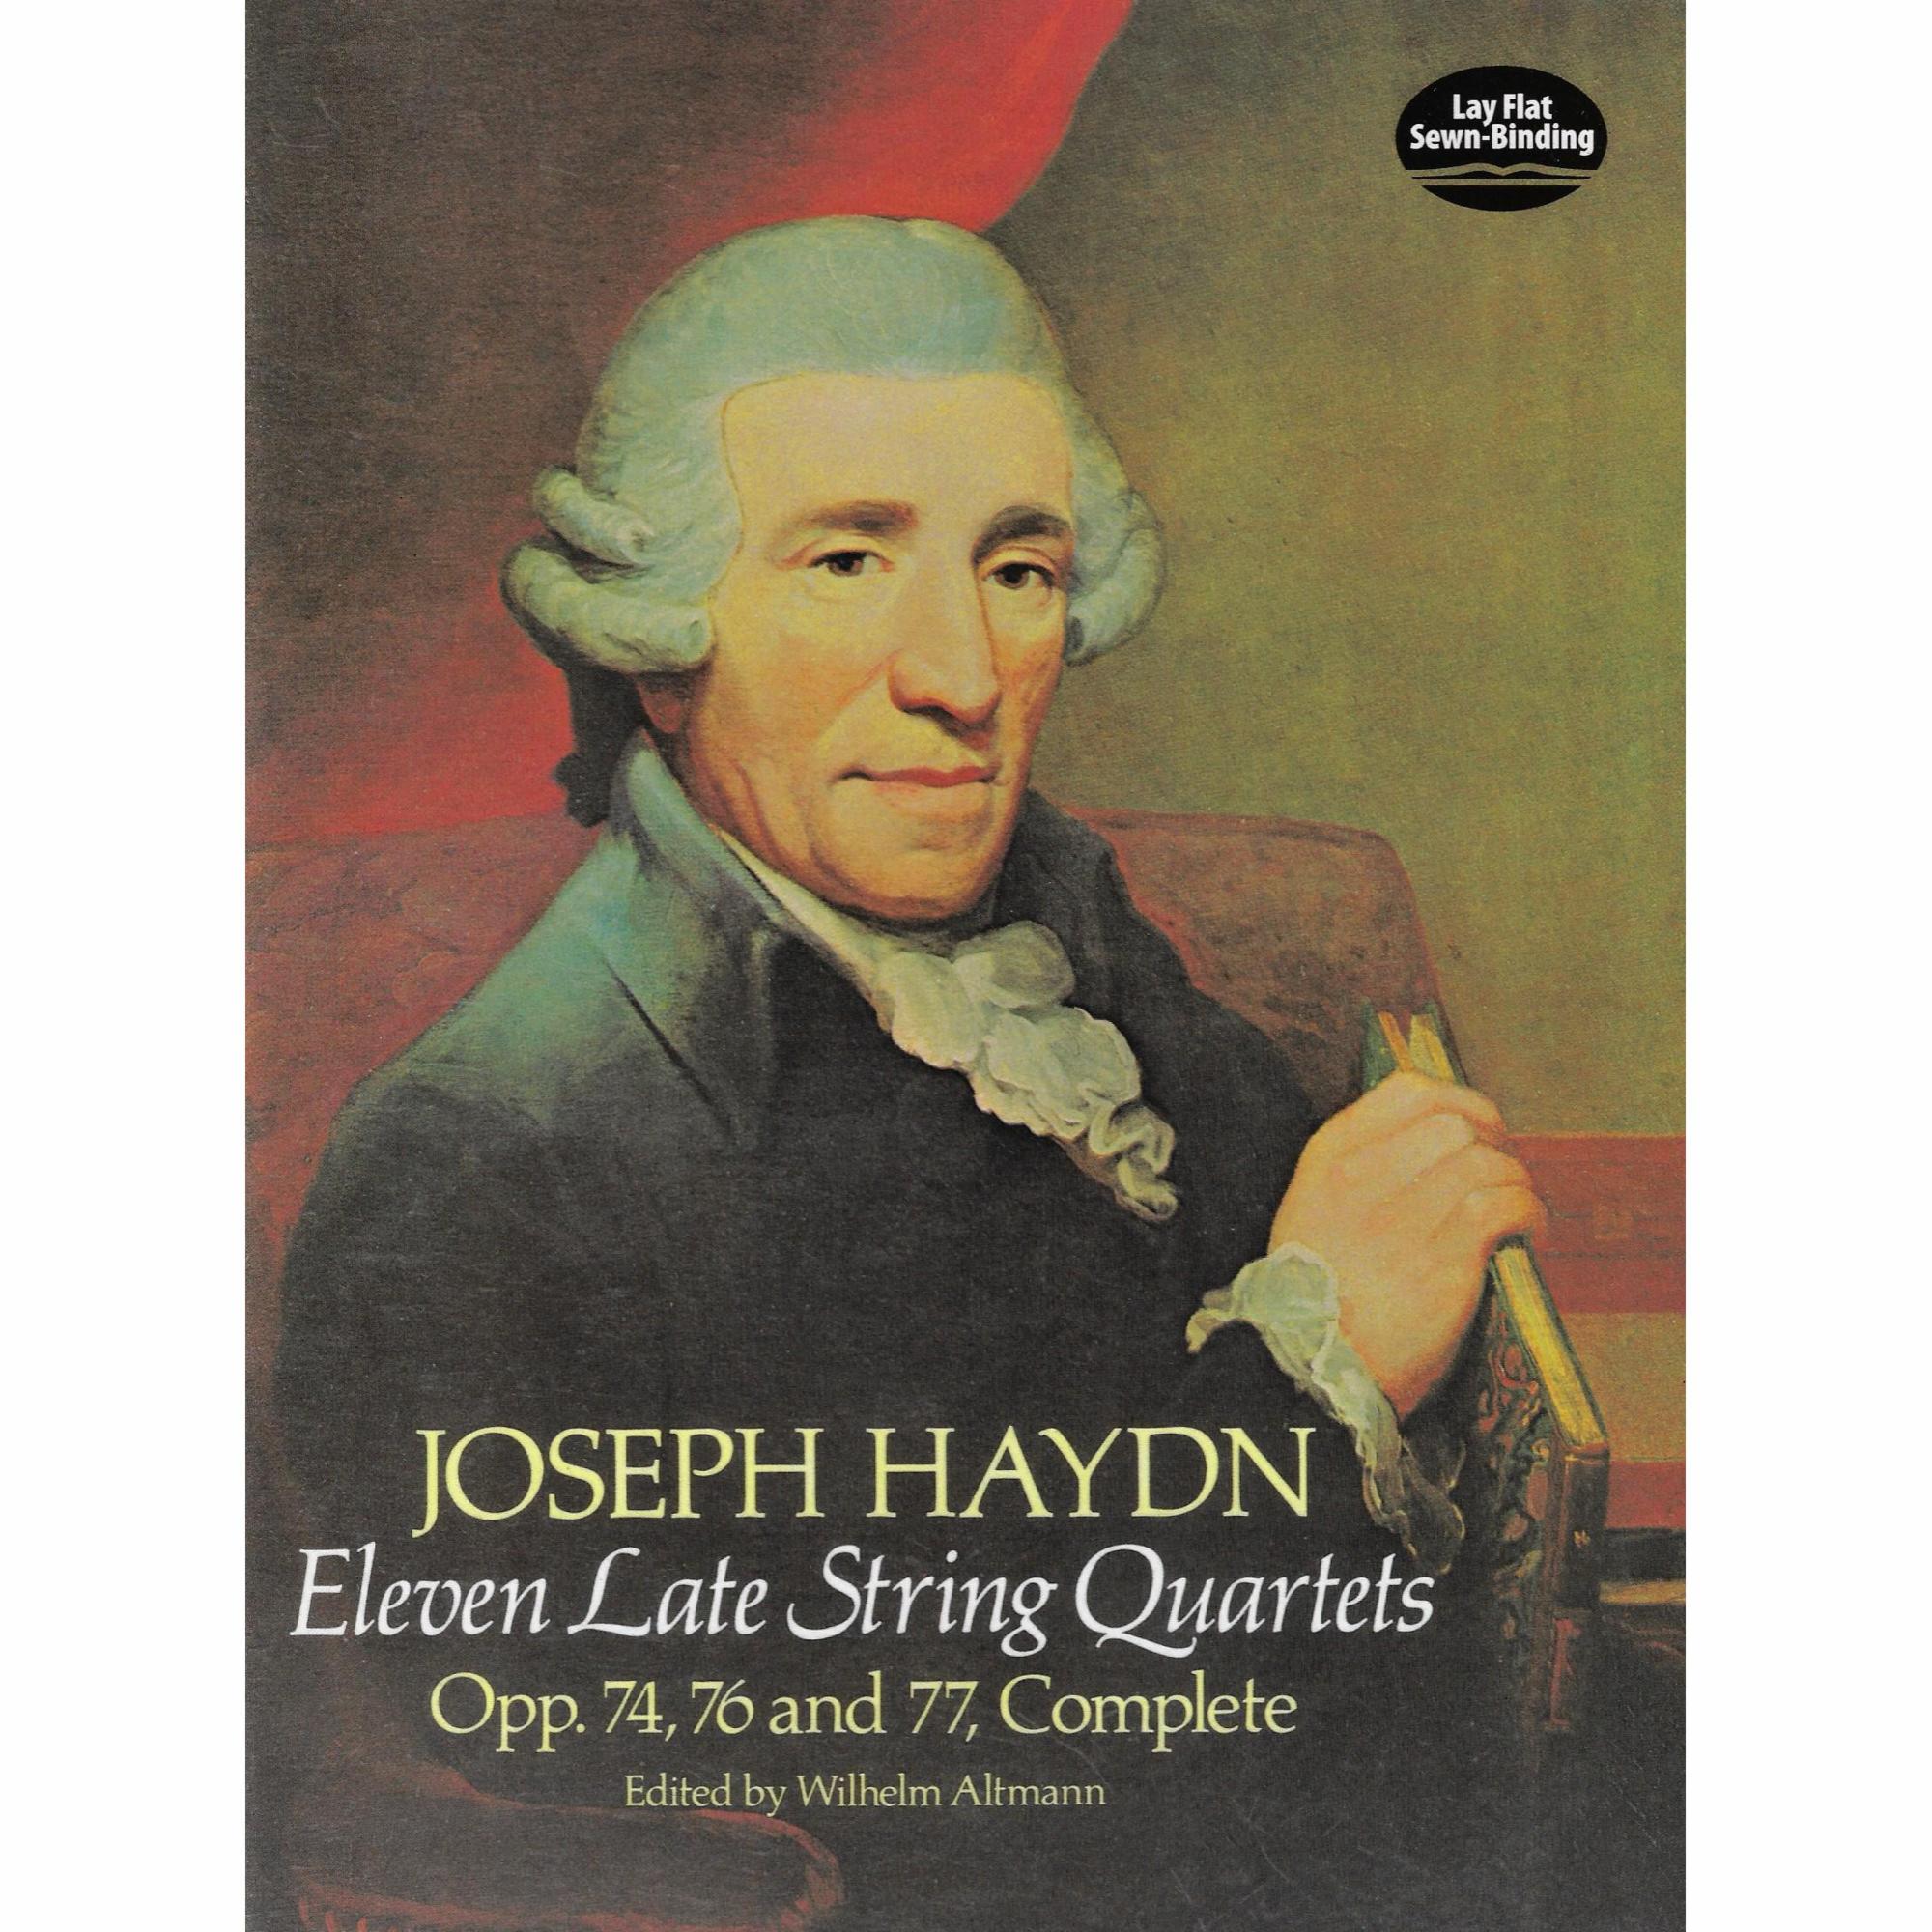 Haydn -- Eleven Late String Quartets, Opp. 74, 76 and 77, Complete